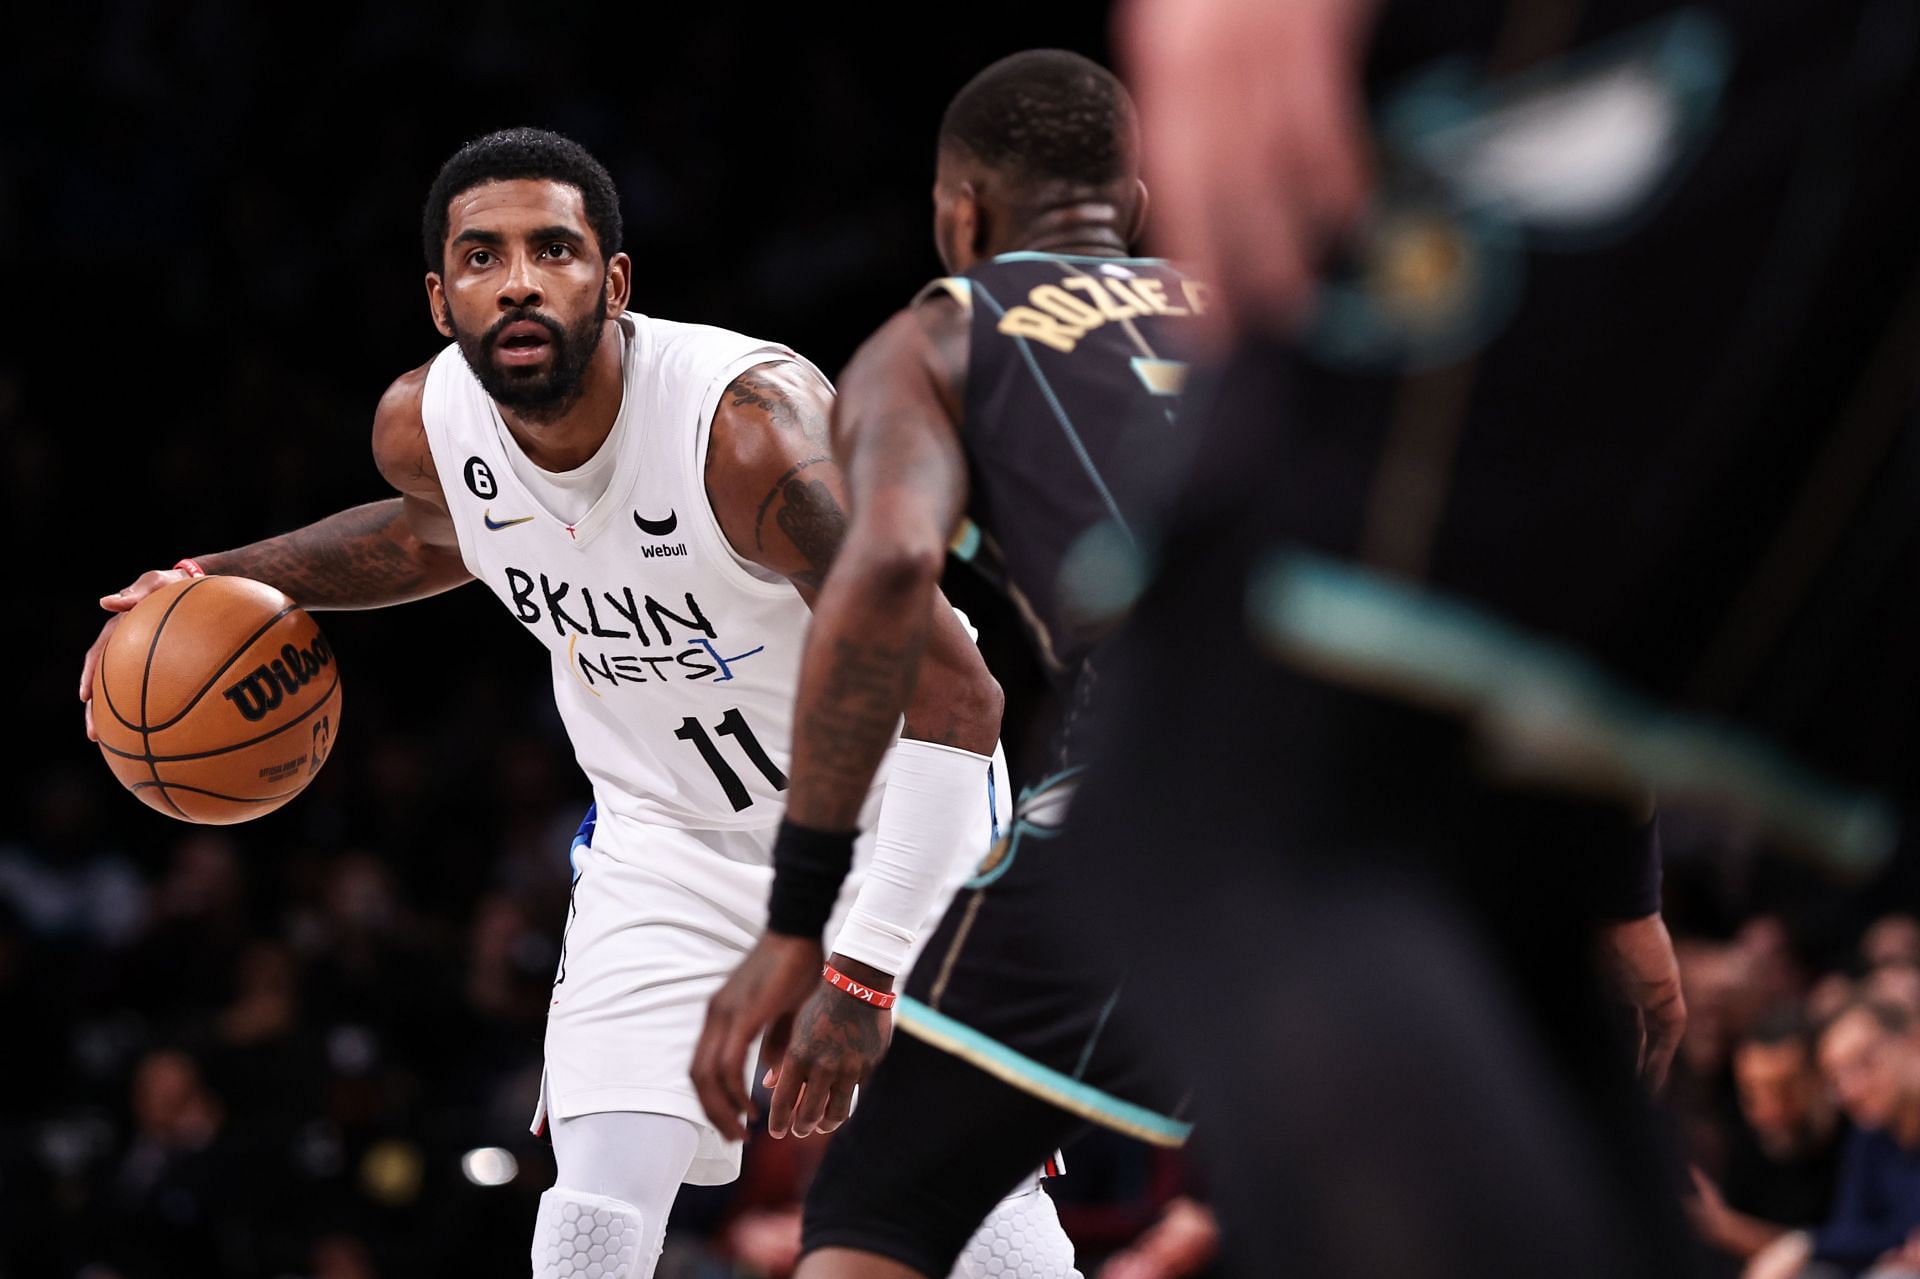 Kyrie Irving of the Brooklyn Nets against the Charlotte Hornets